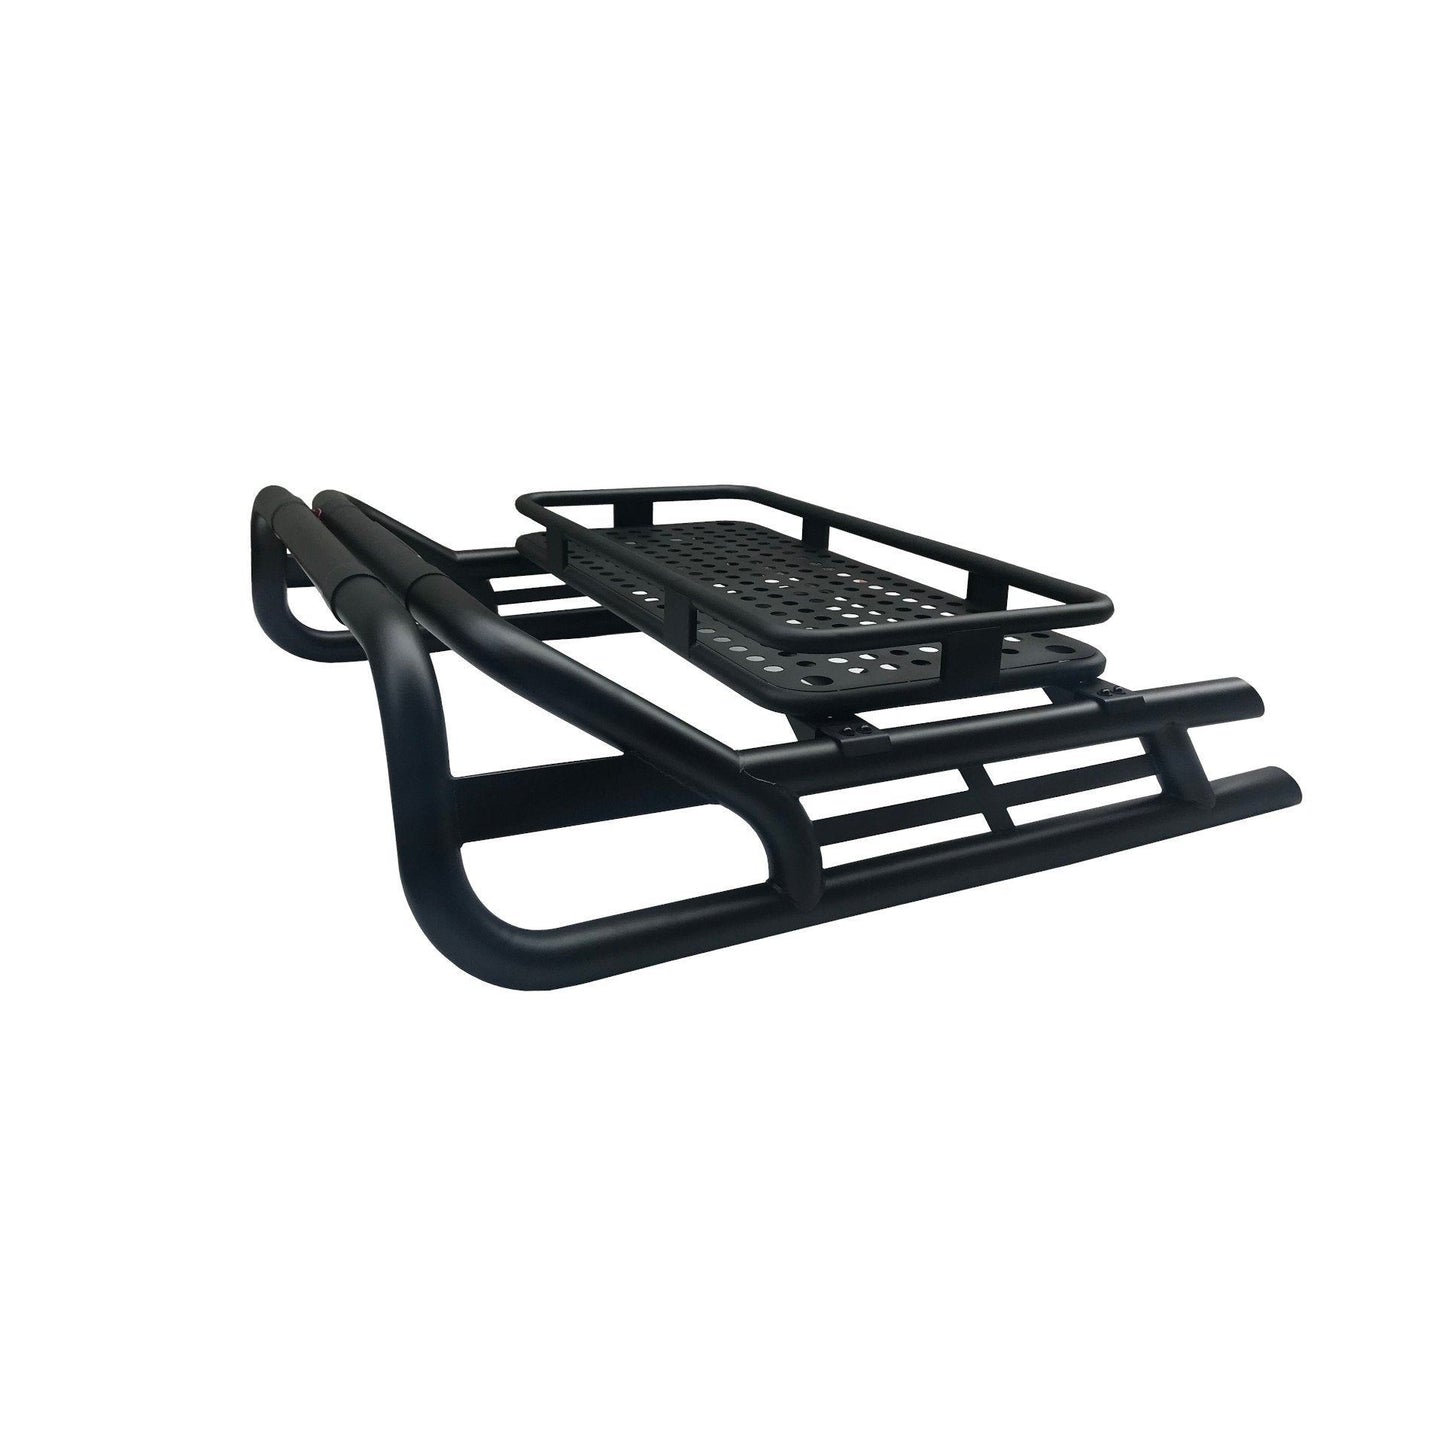 Black SUS201 Long Arm Roll Bar with Cargo Basket Rack for Ford Ranger 2006-2012